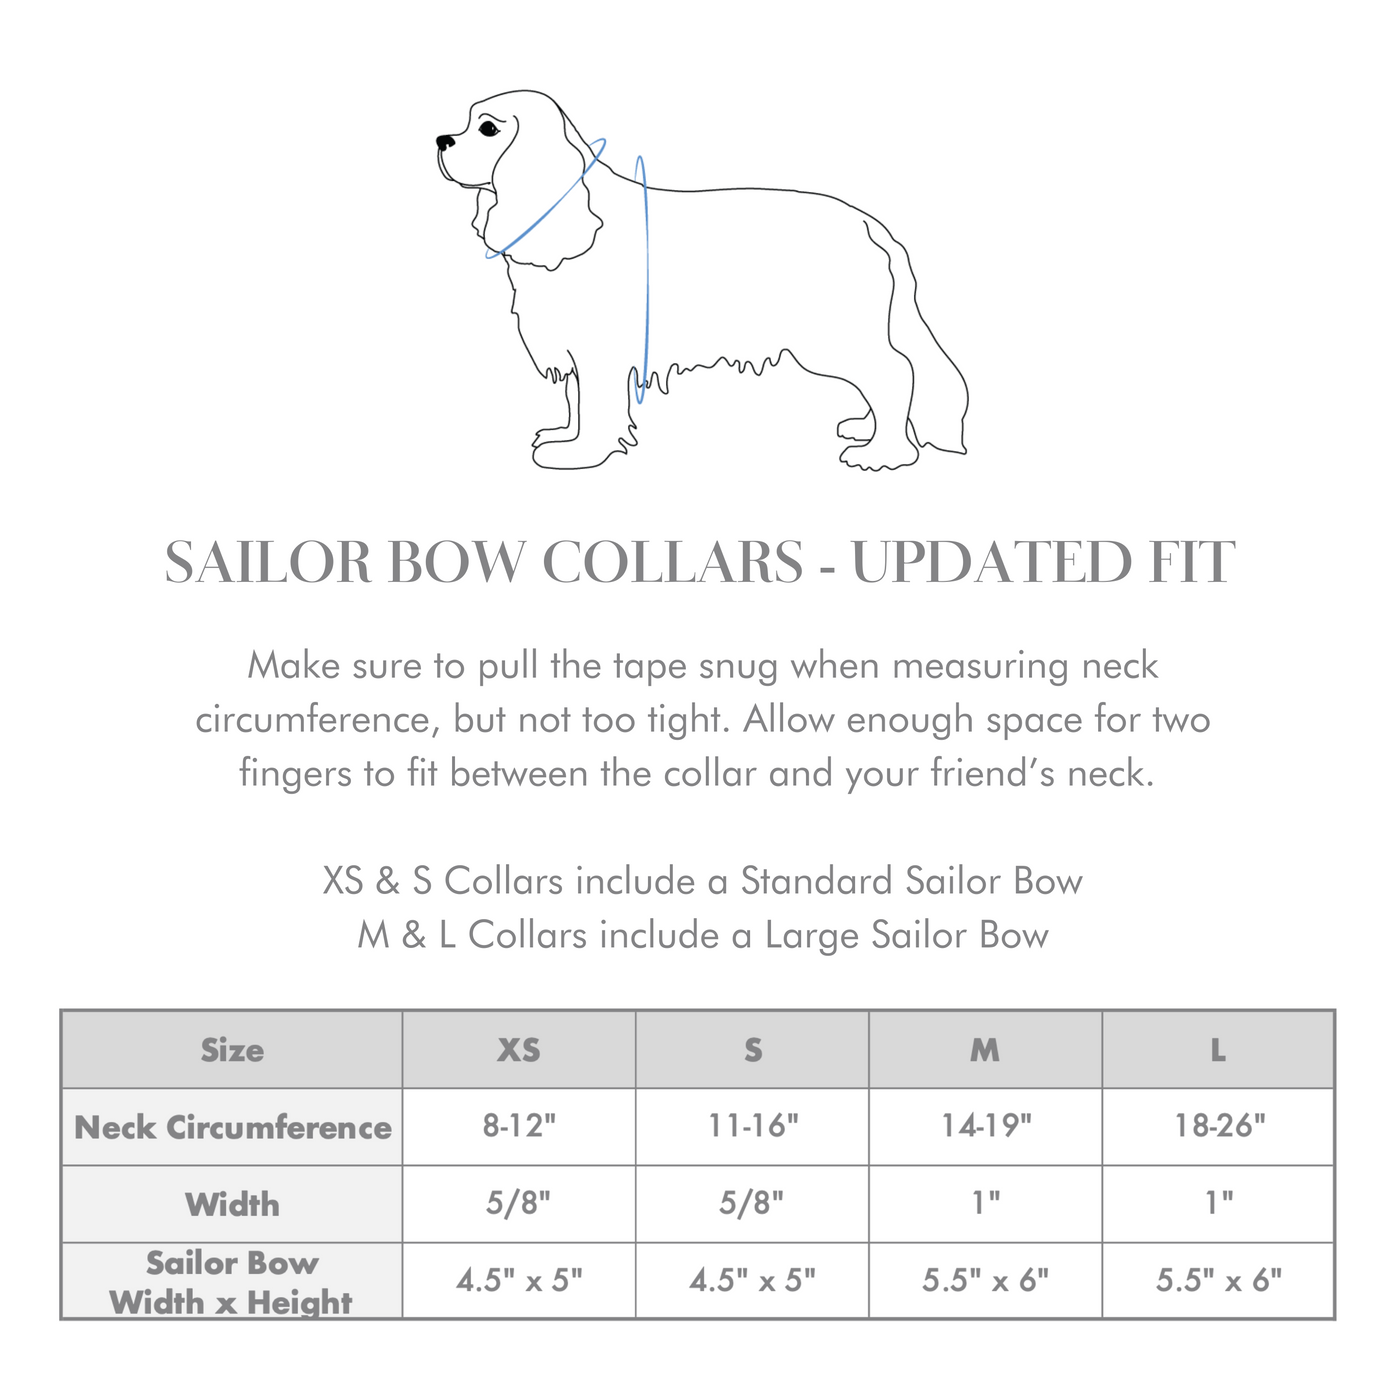 Dog collar with sailor bow size chart